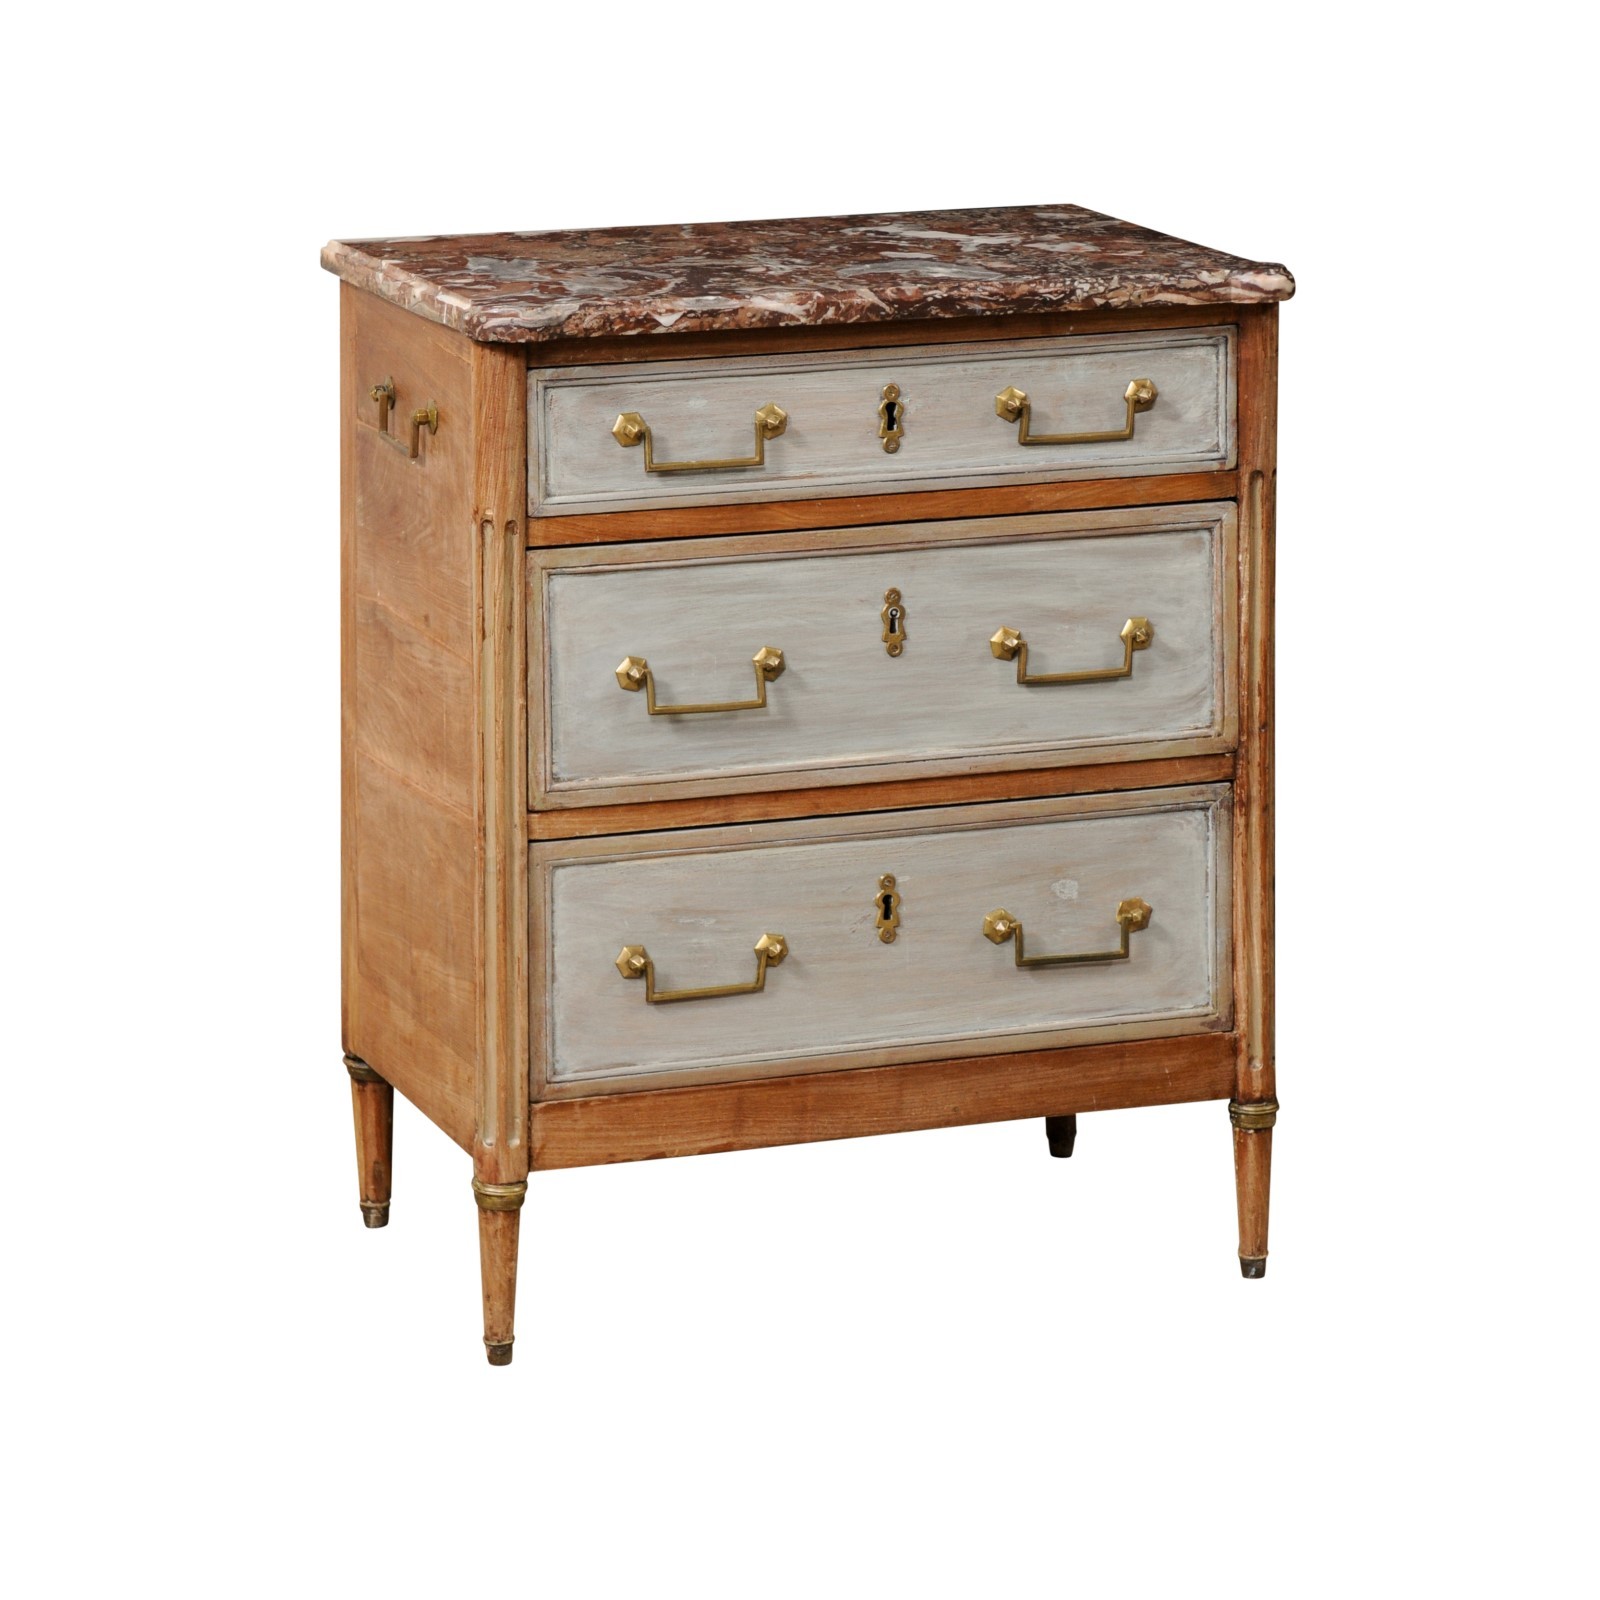 Antique Neoclassical Petite Commode, France